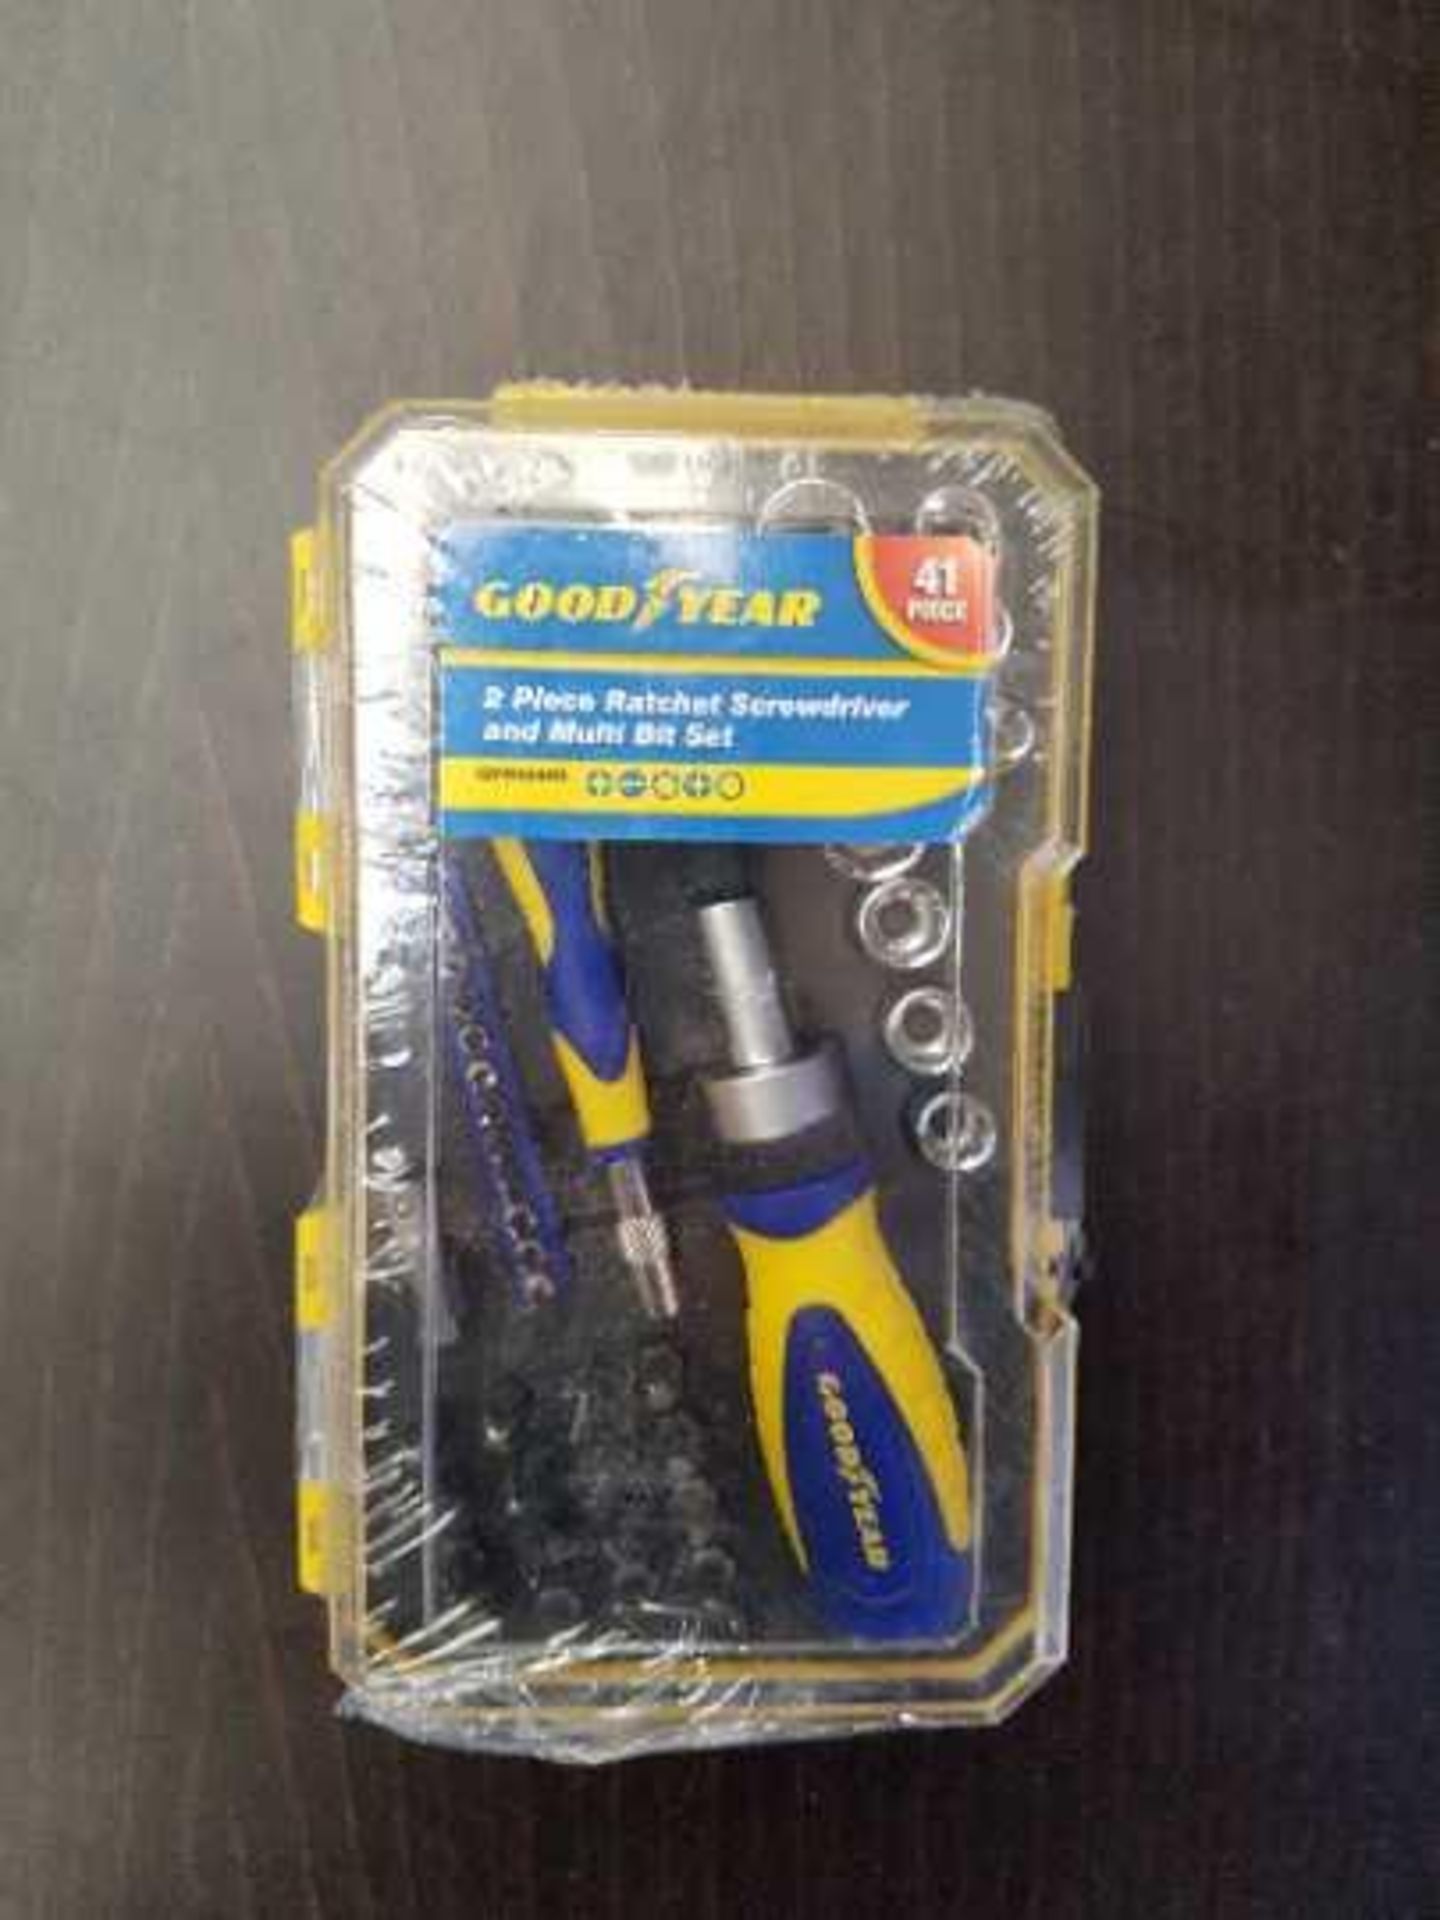 41 Piece Goodyear Ratchet screwdriver and Multi Bit set, Brand New in Packaging